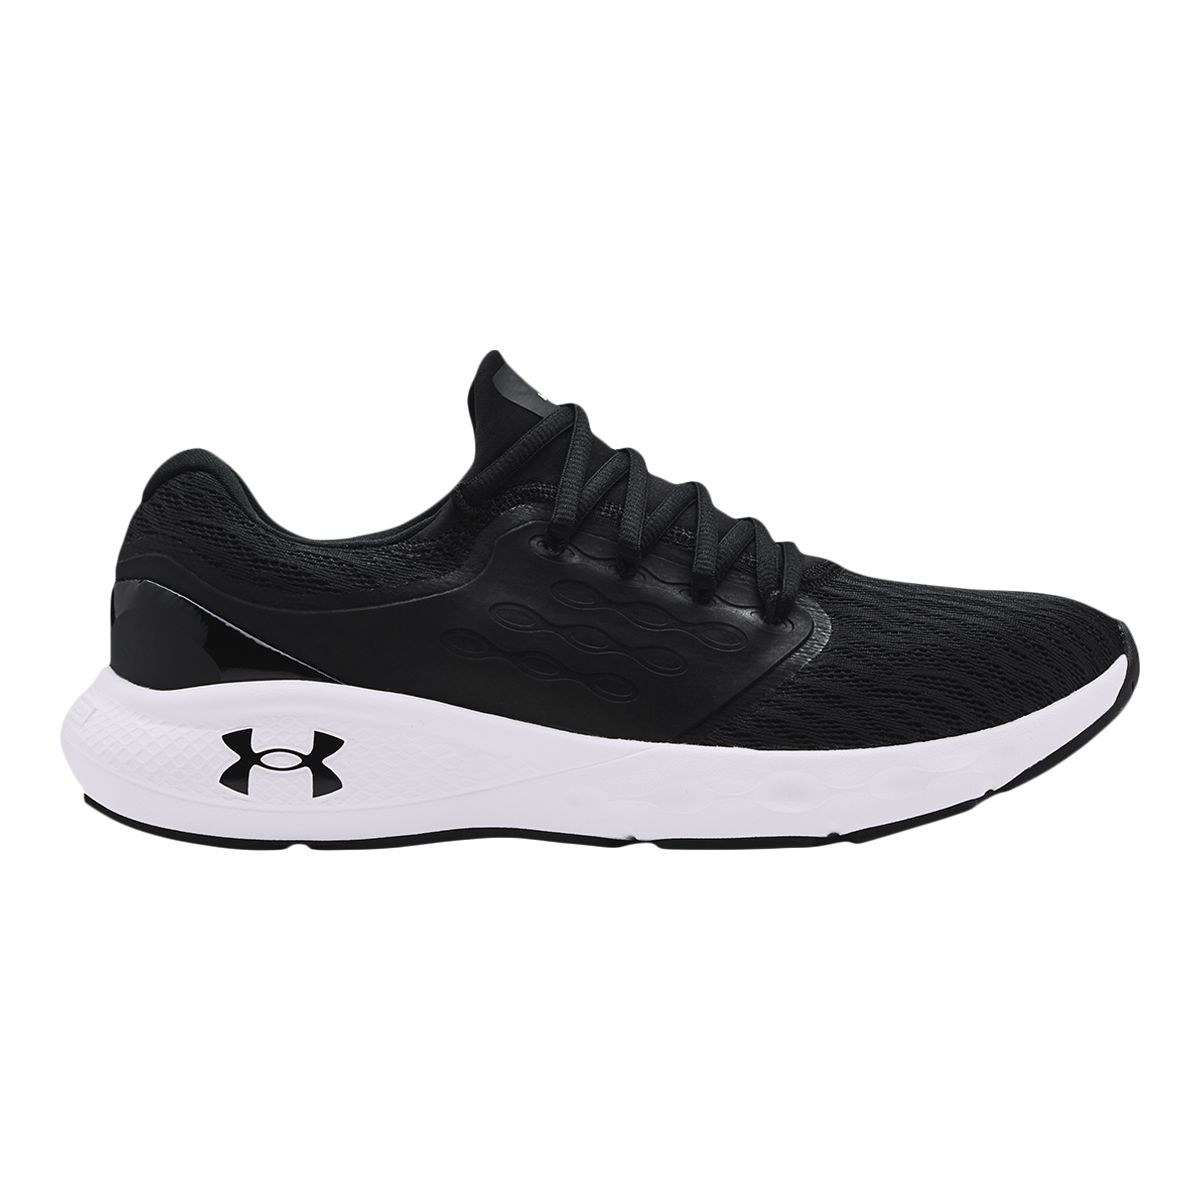 Under Armour Men's Charged Vantage Lightweight Mesh Running Shoes ...